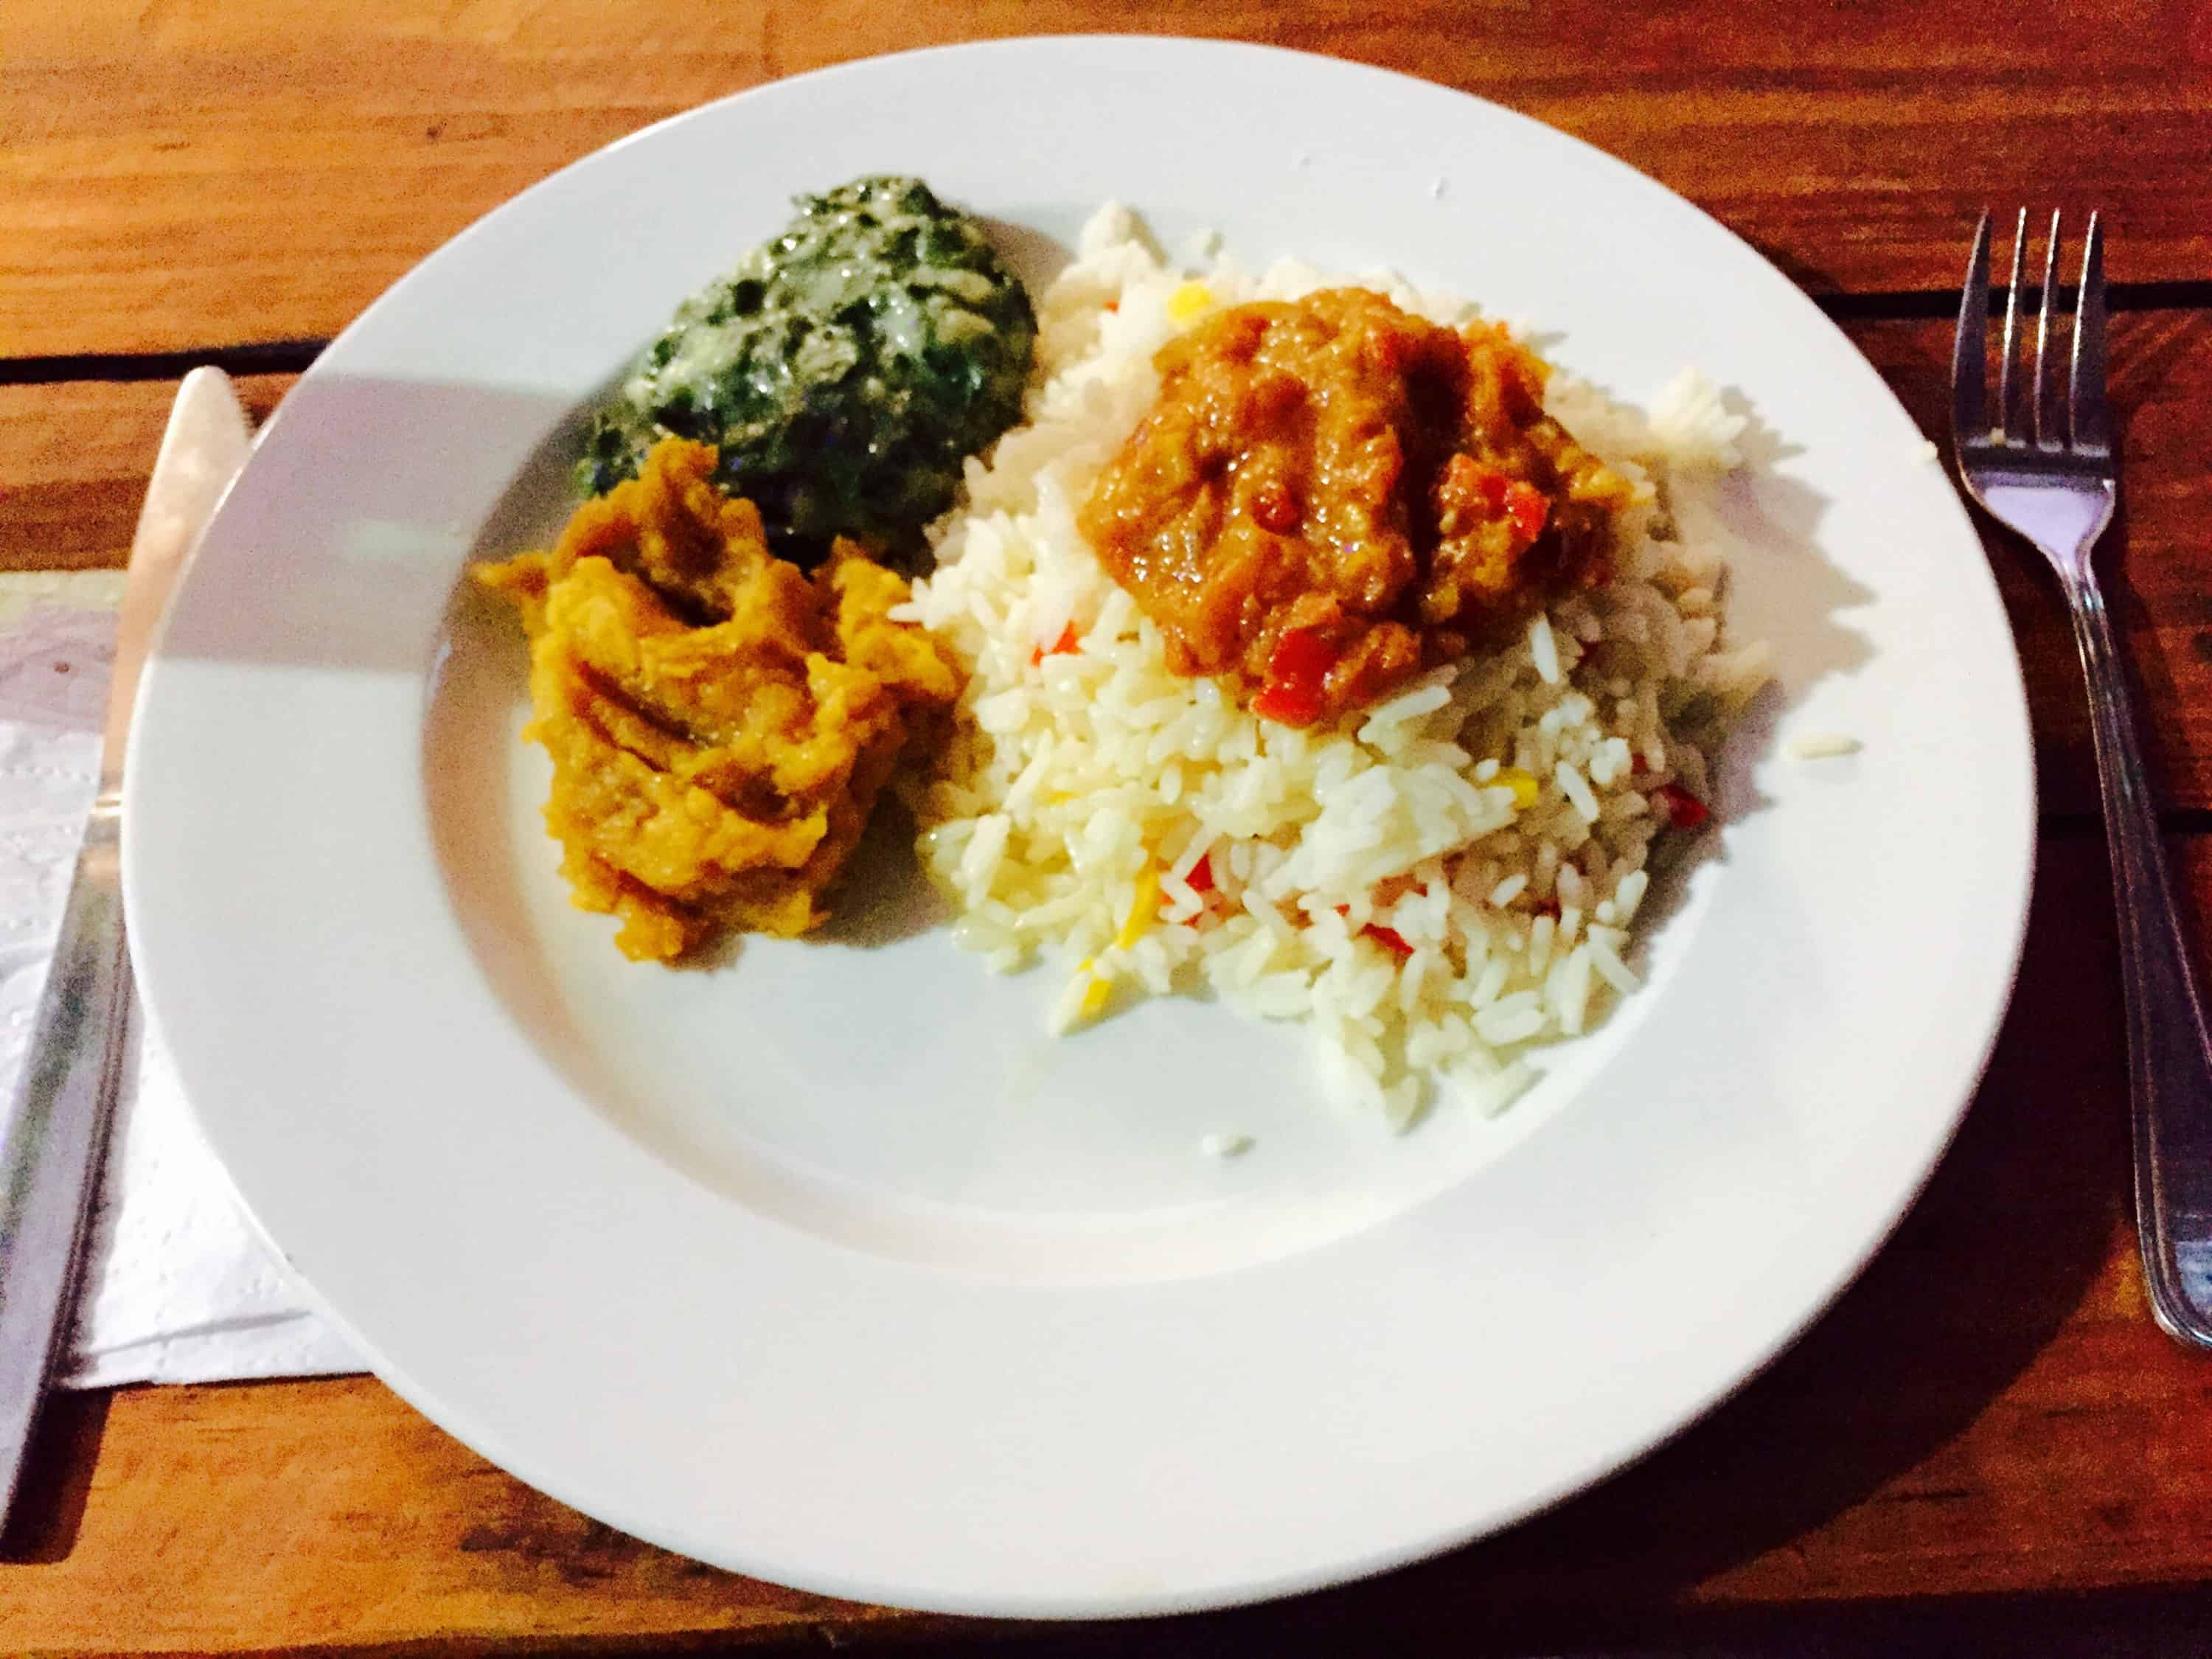 south africa food, south africa cuisine, south africa vegetarian food